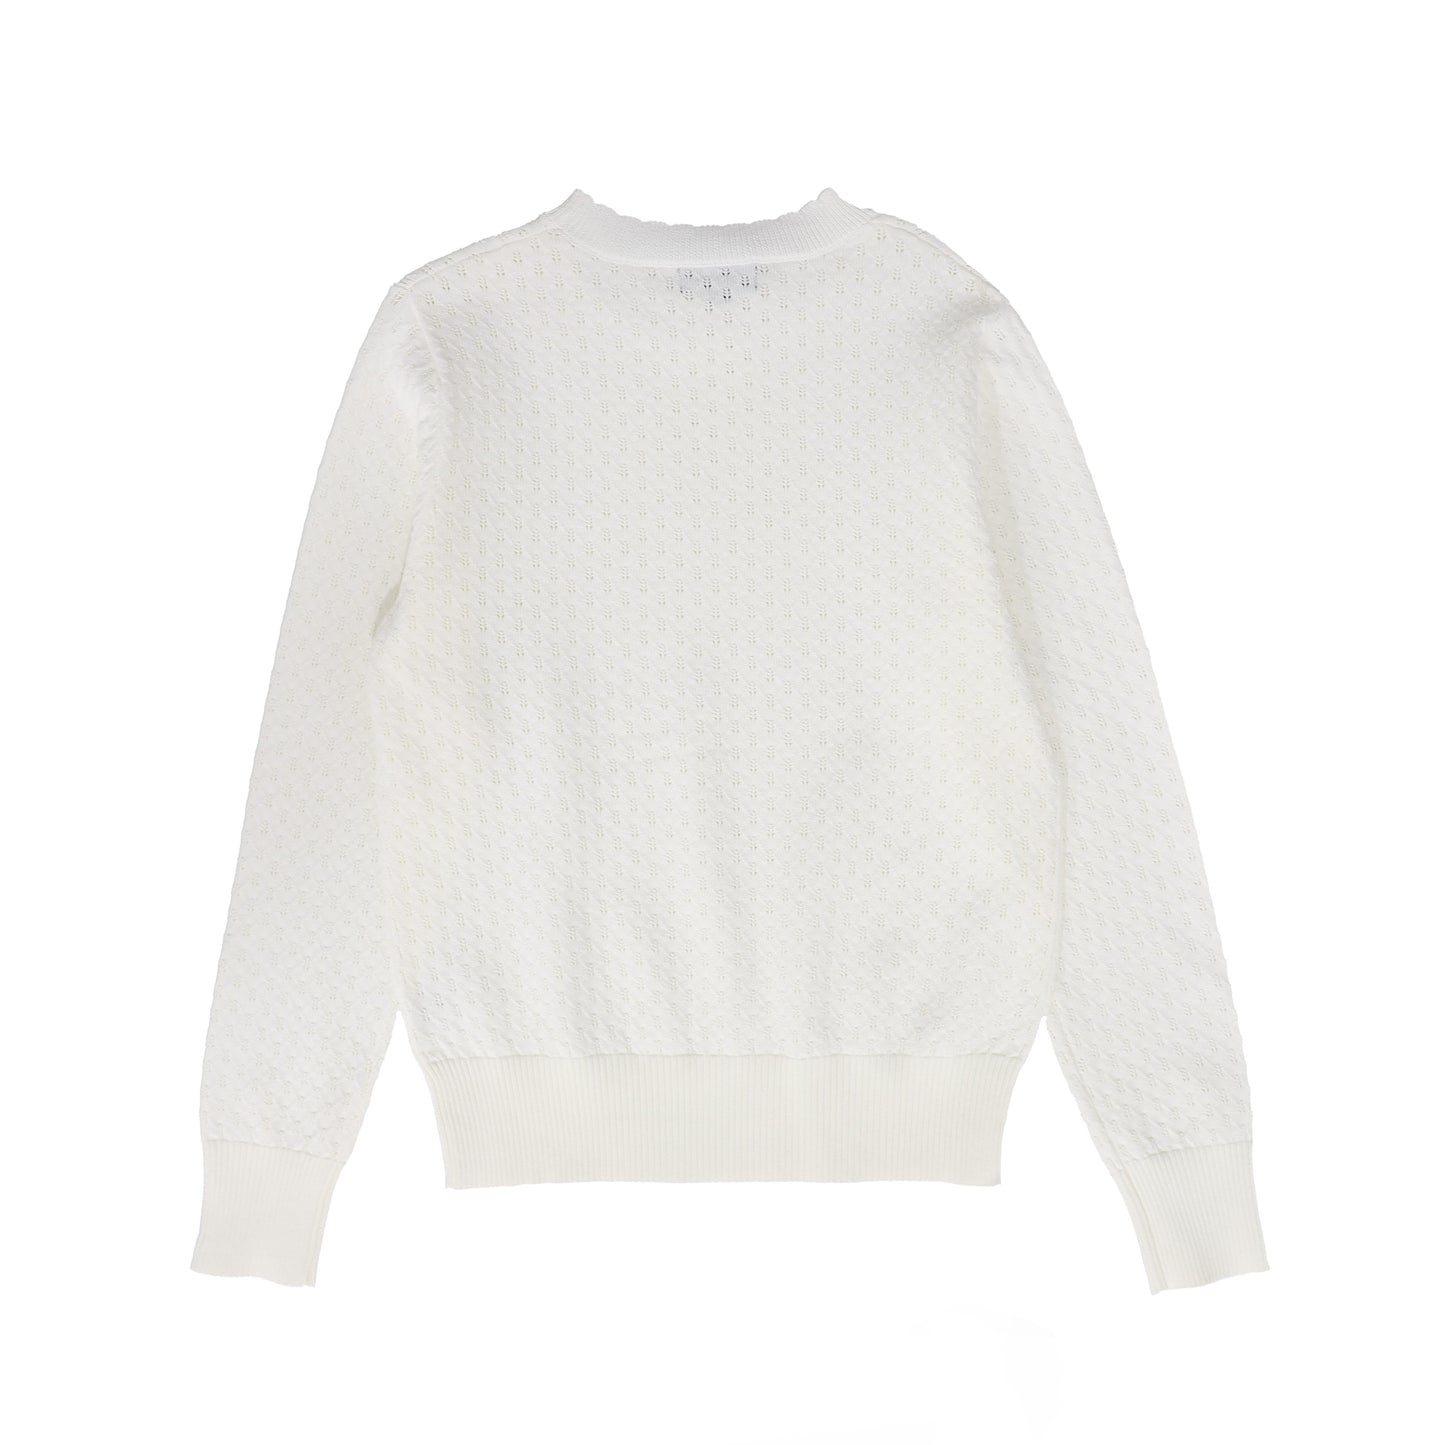 BAMBOO WHITE POINTELLE SWEATER [FINAL SALE]